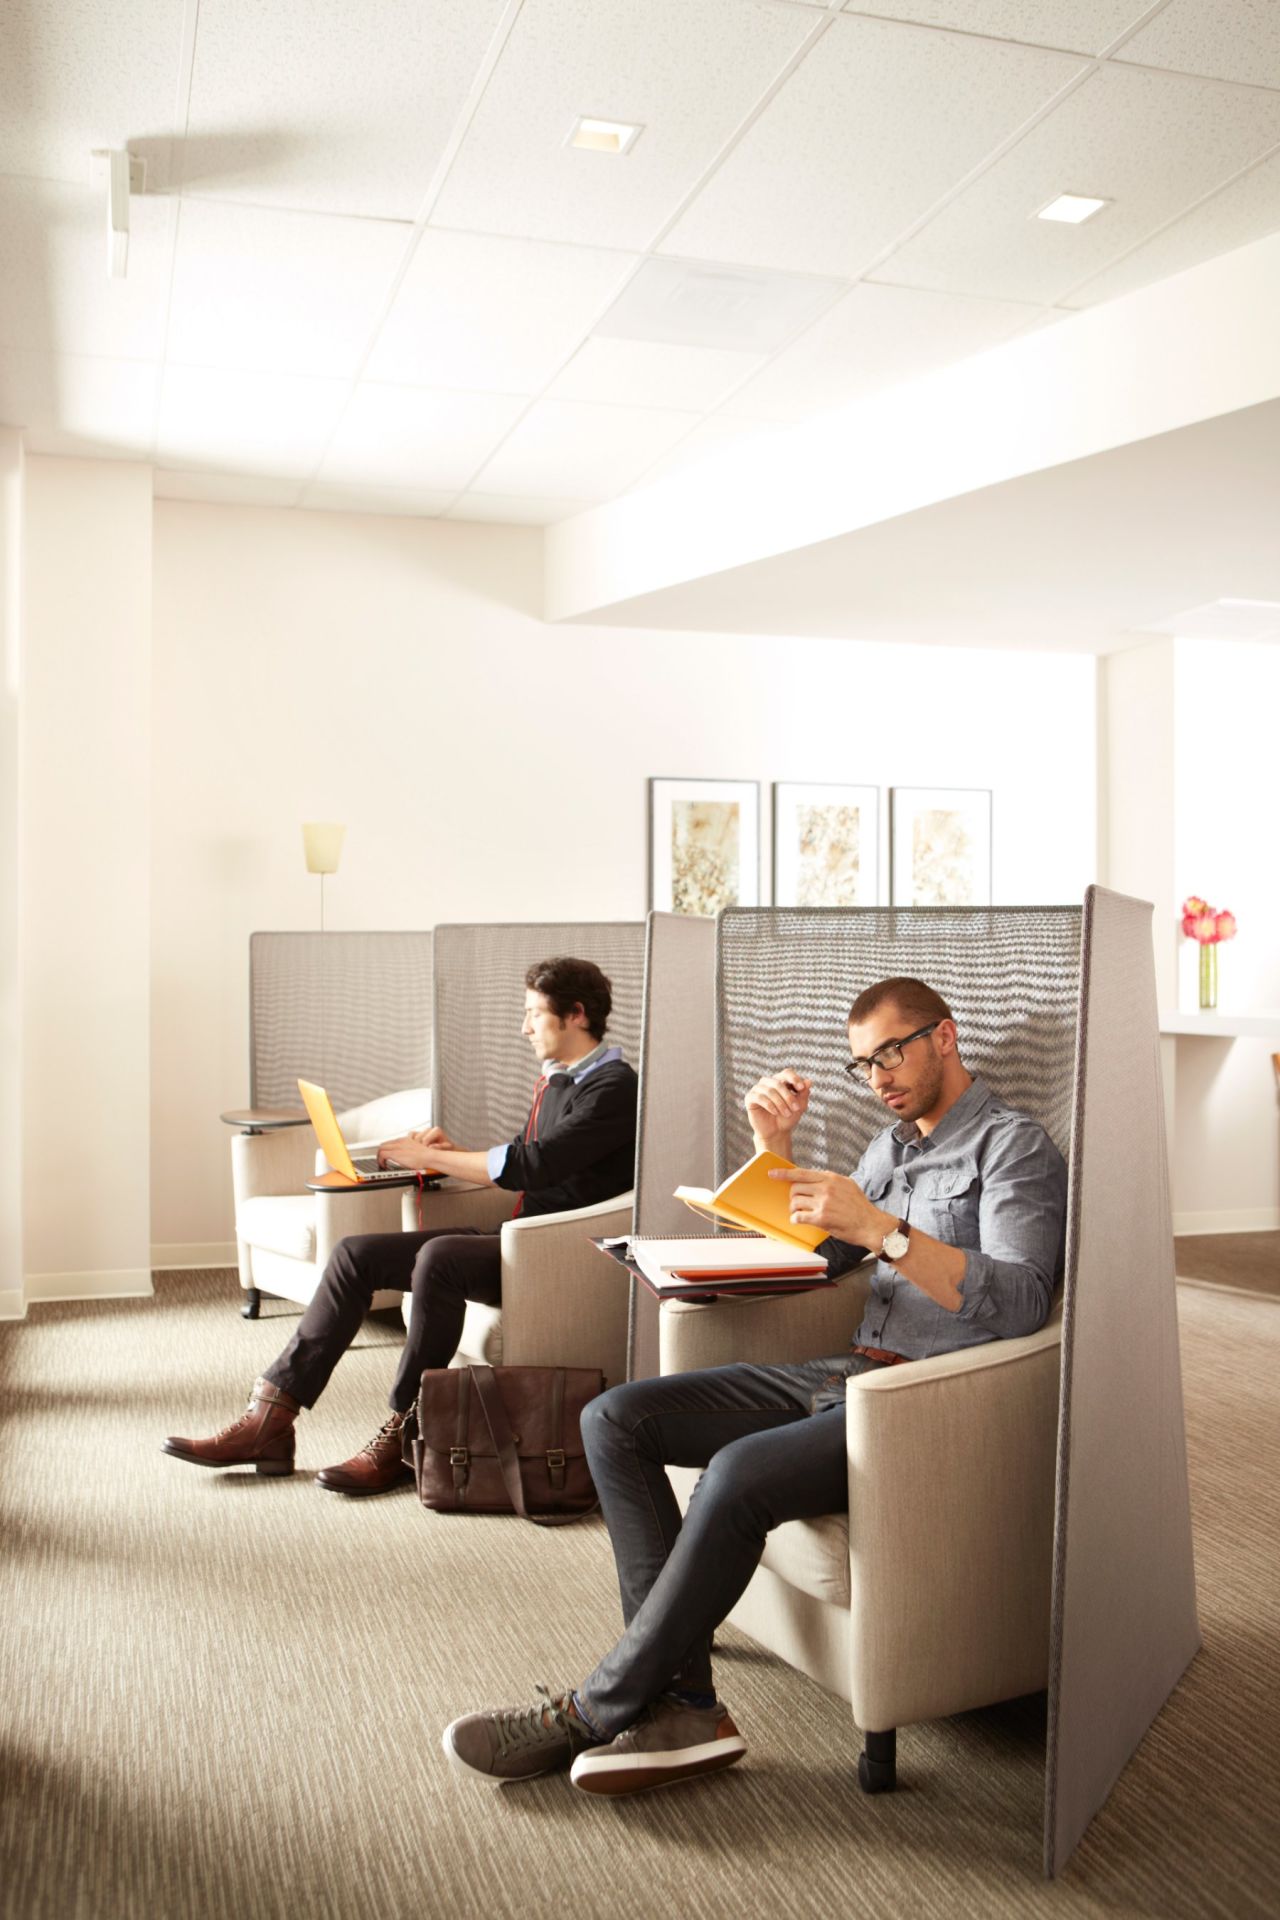 Individuals who need a quiet place to work can book space at Marriott by the hour  through LiquidSpace.com